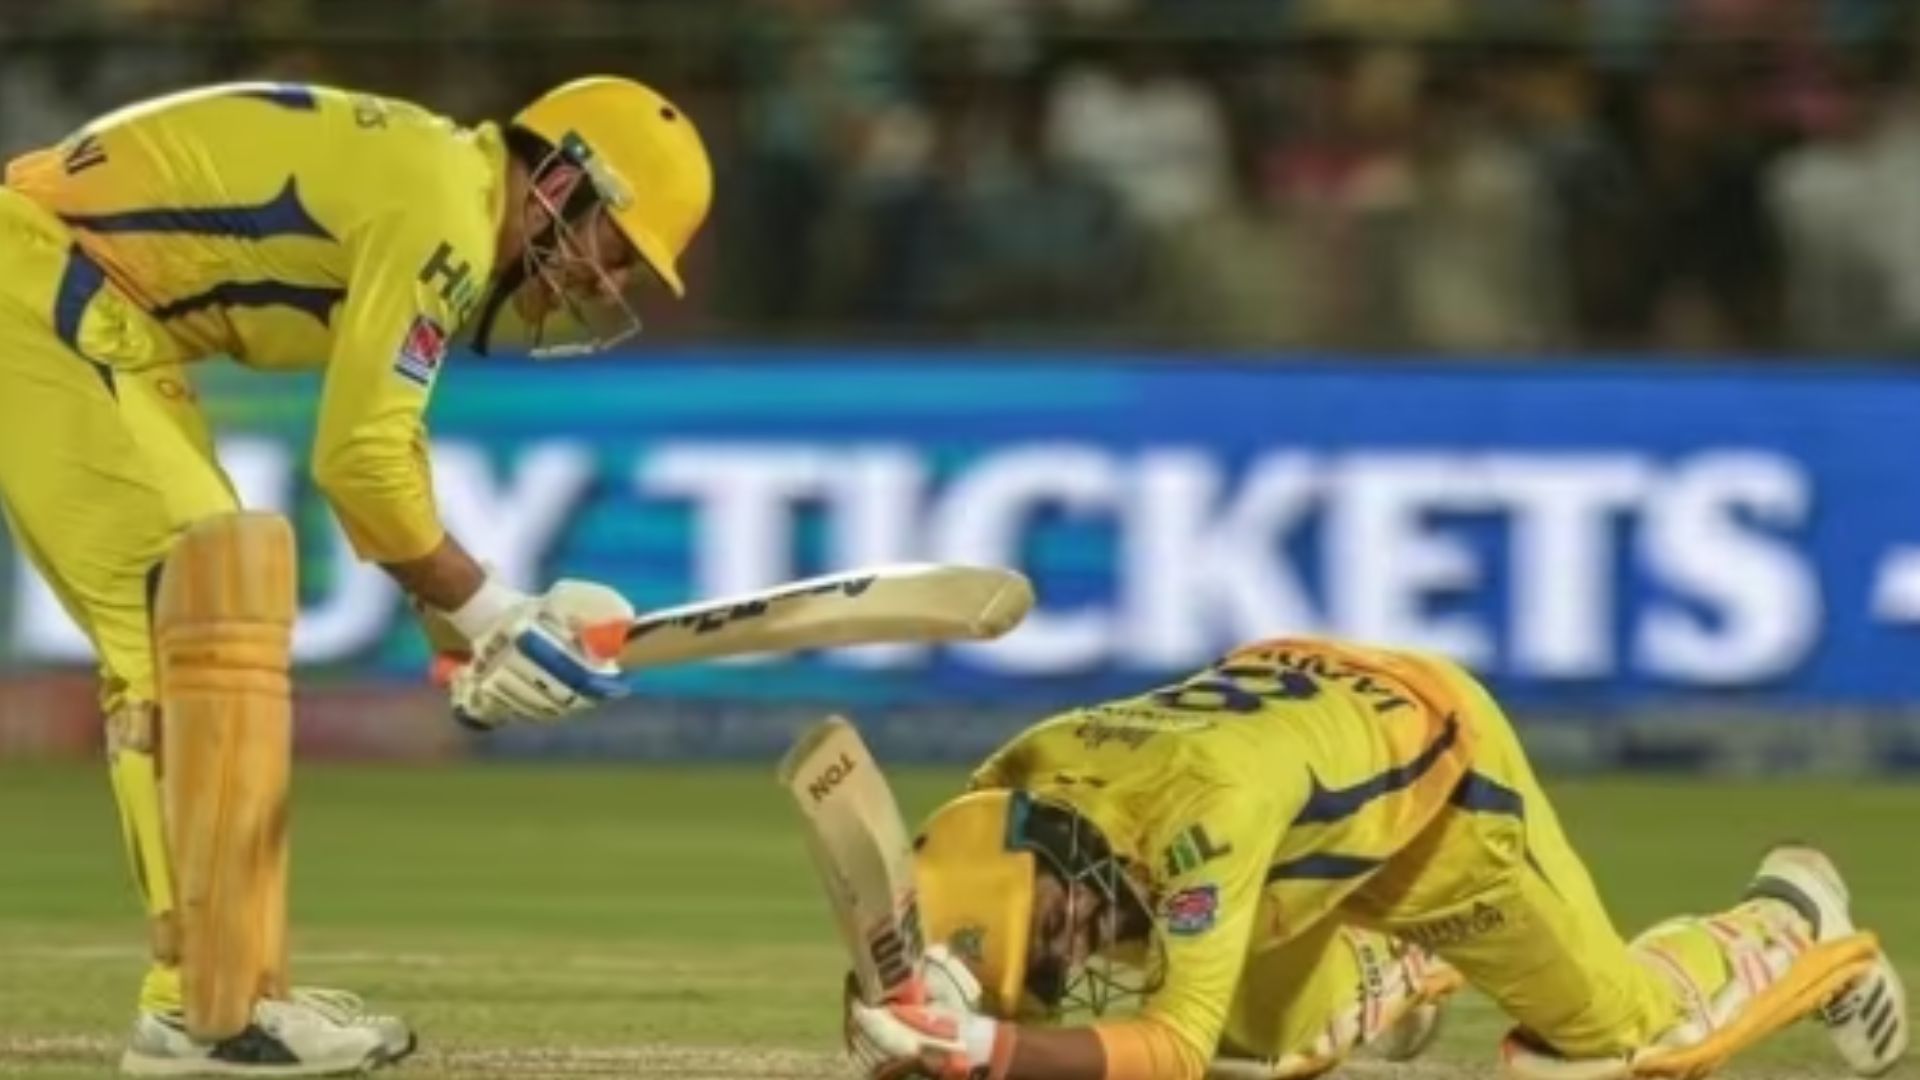 Dhoni jokingly taps Jadeja on the helmet with his bat after the latter struck an amazing shot.